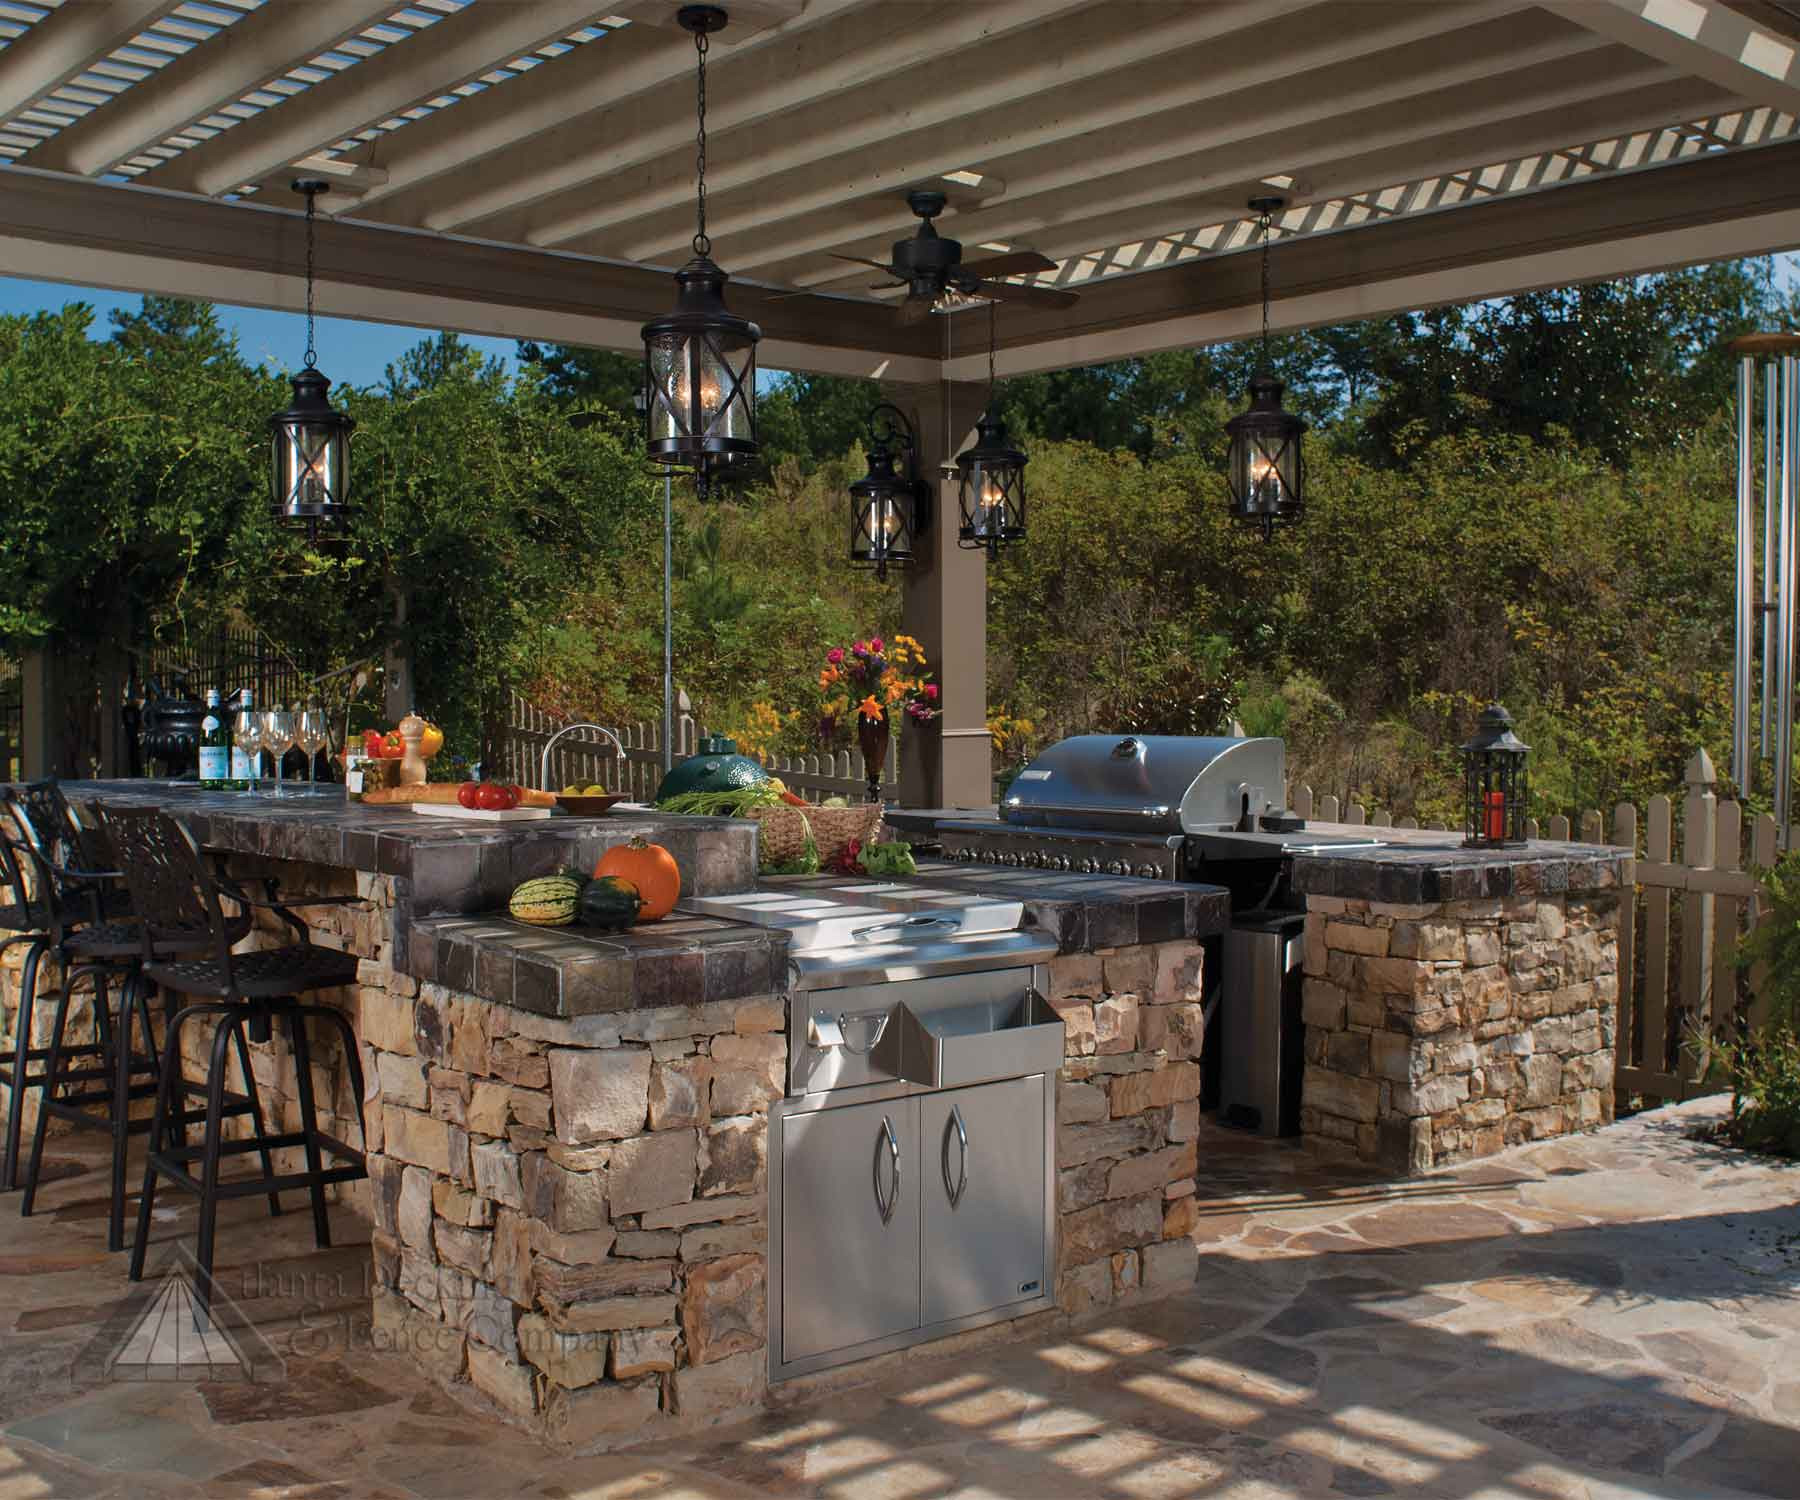 Outdoor Patio Kitchen Designs
 Outdoor Kitchen Designing The Perfect Backyard Cooking